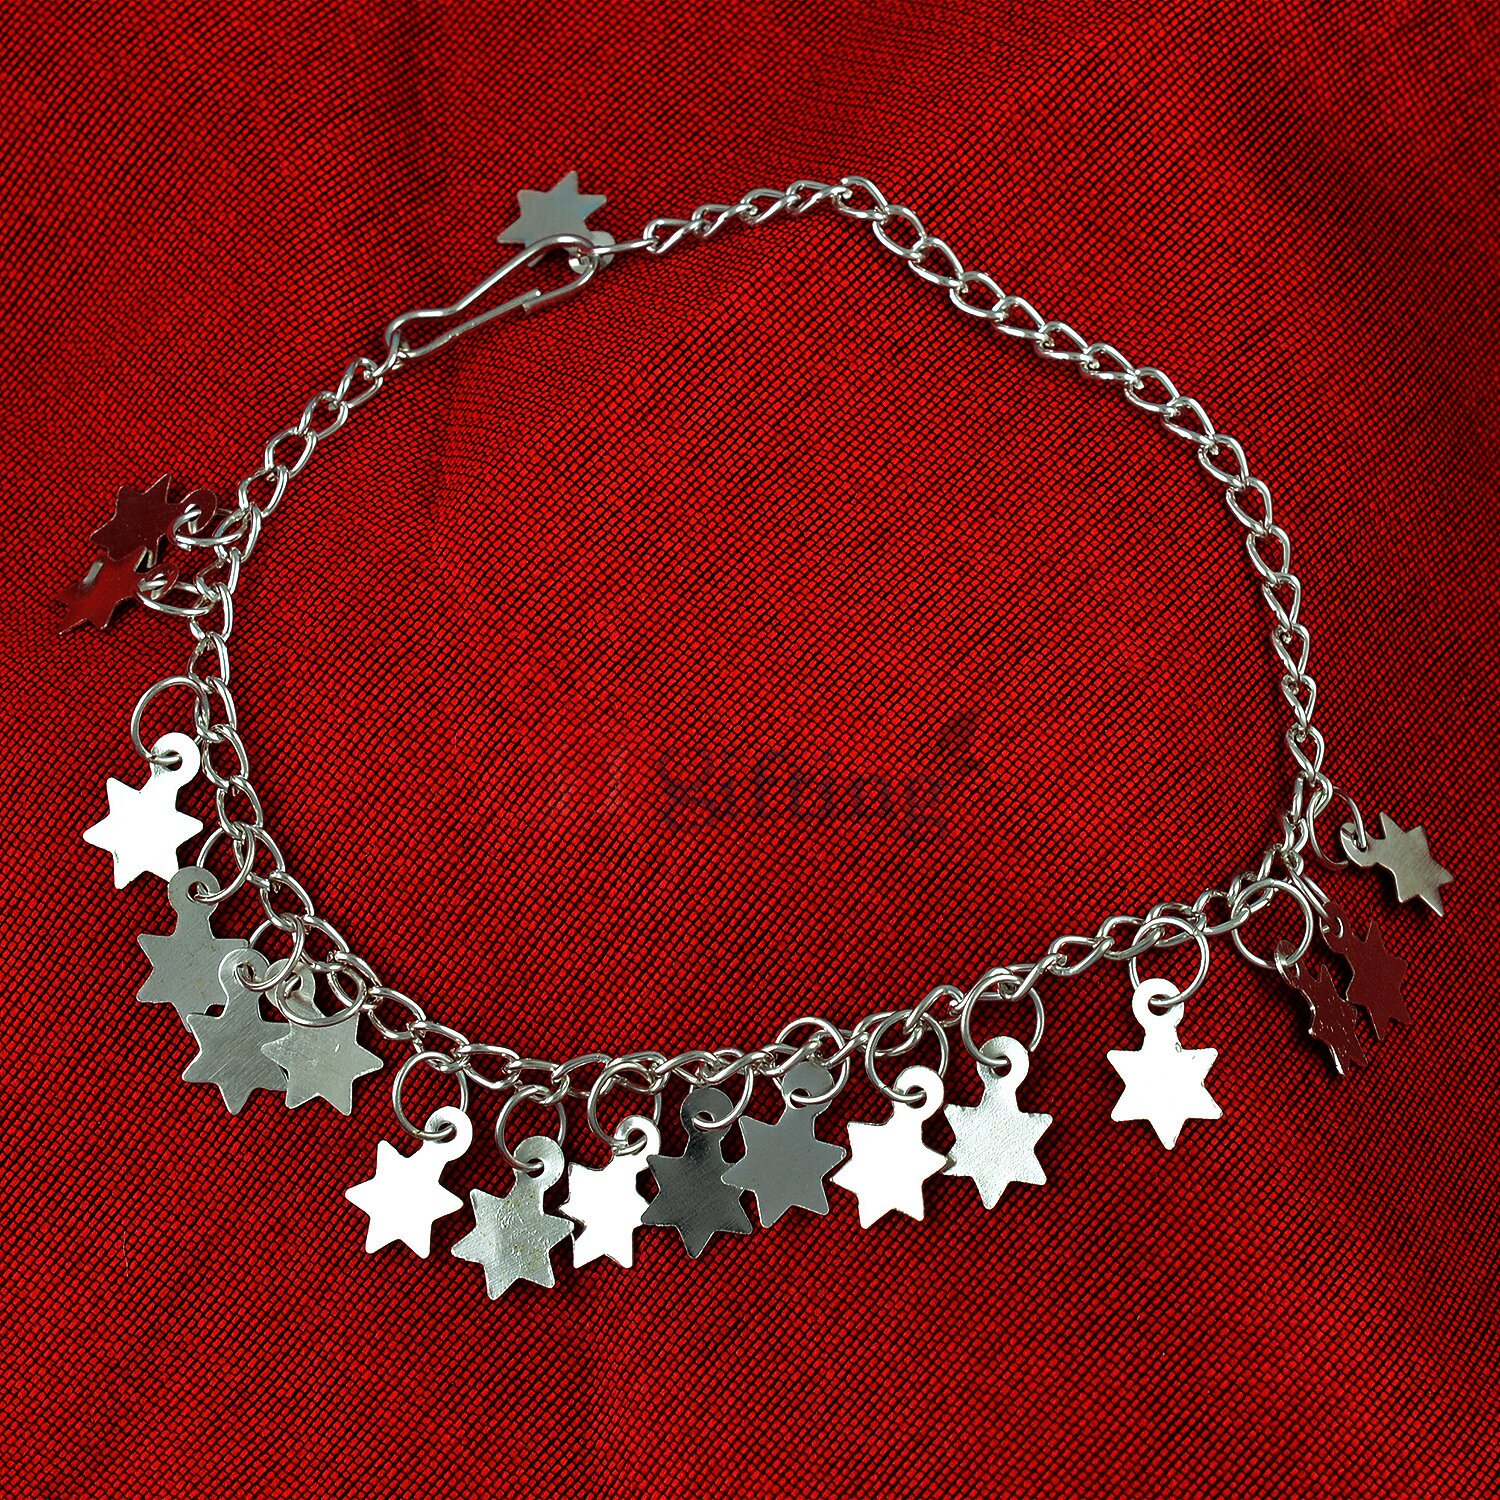 Shining Silver Stars Crafted in Chain Bracelet